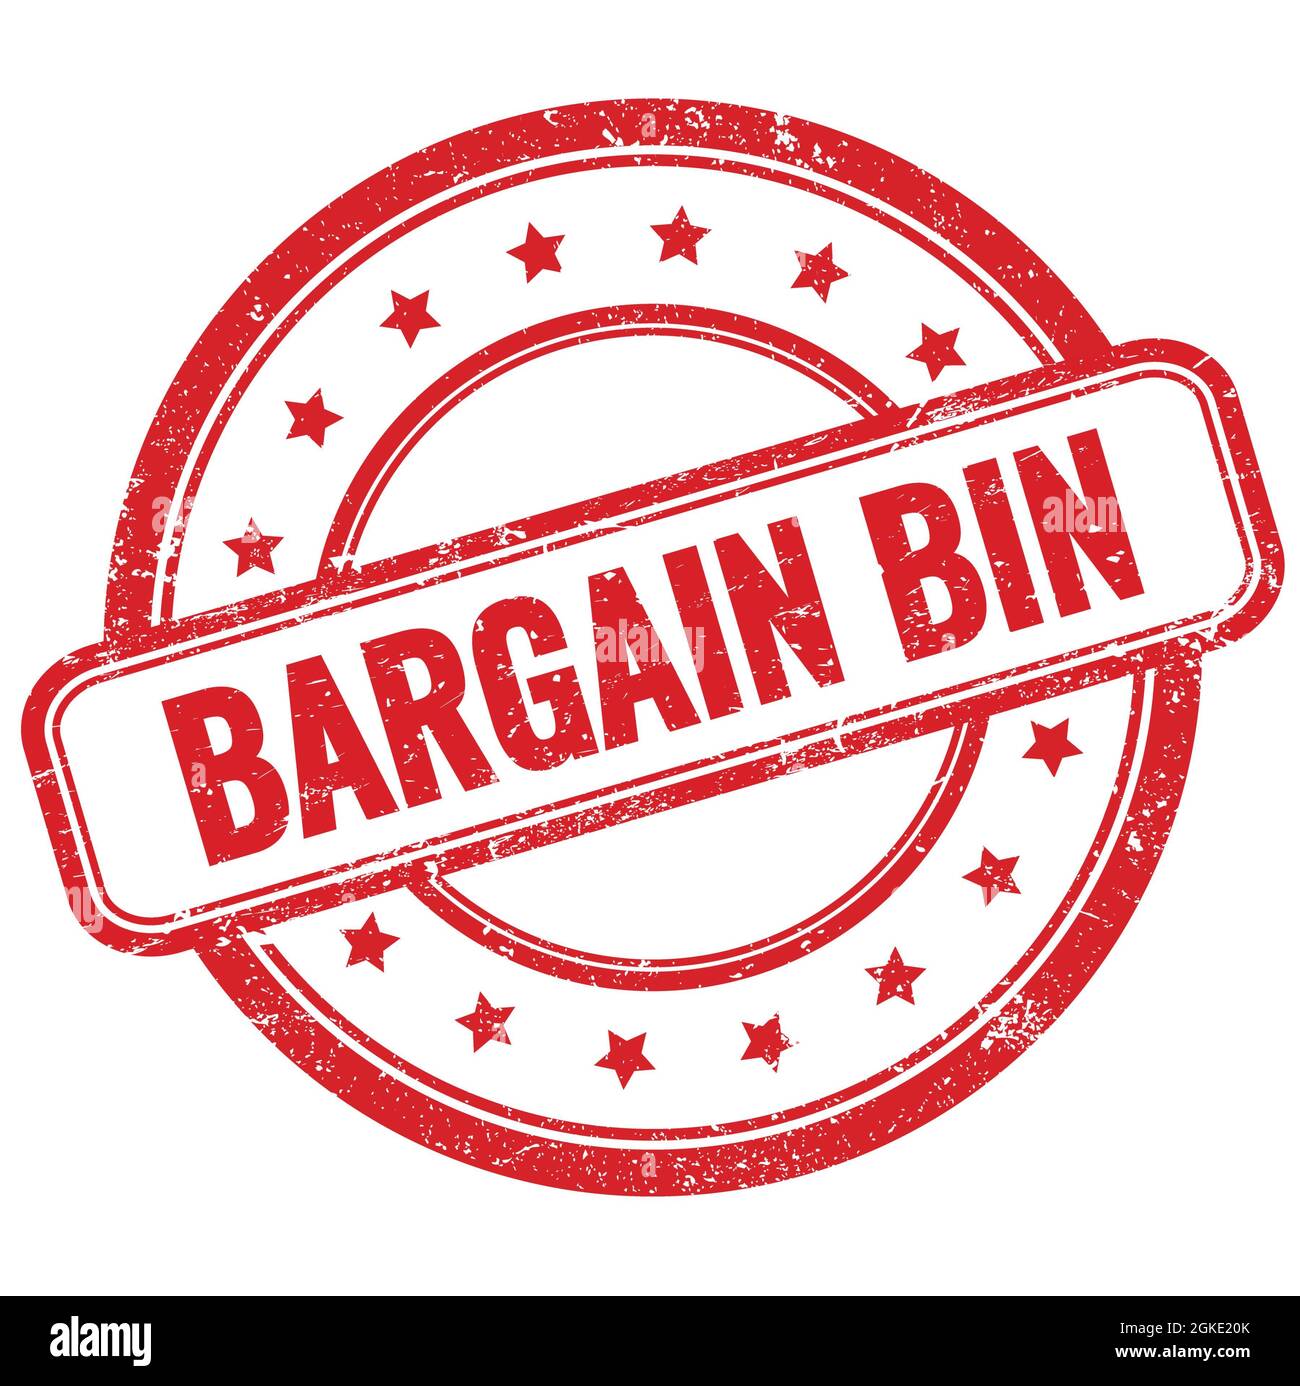 BARGAIN BIN text on red vintage grungy round rubber stamp. Stock Photo